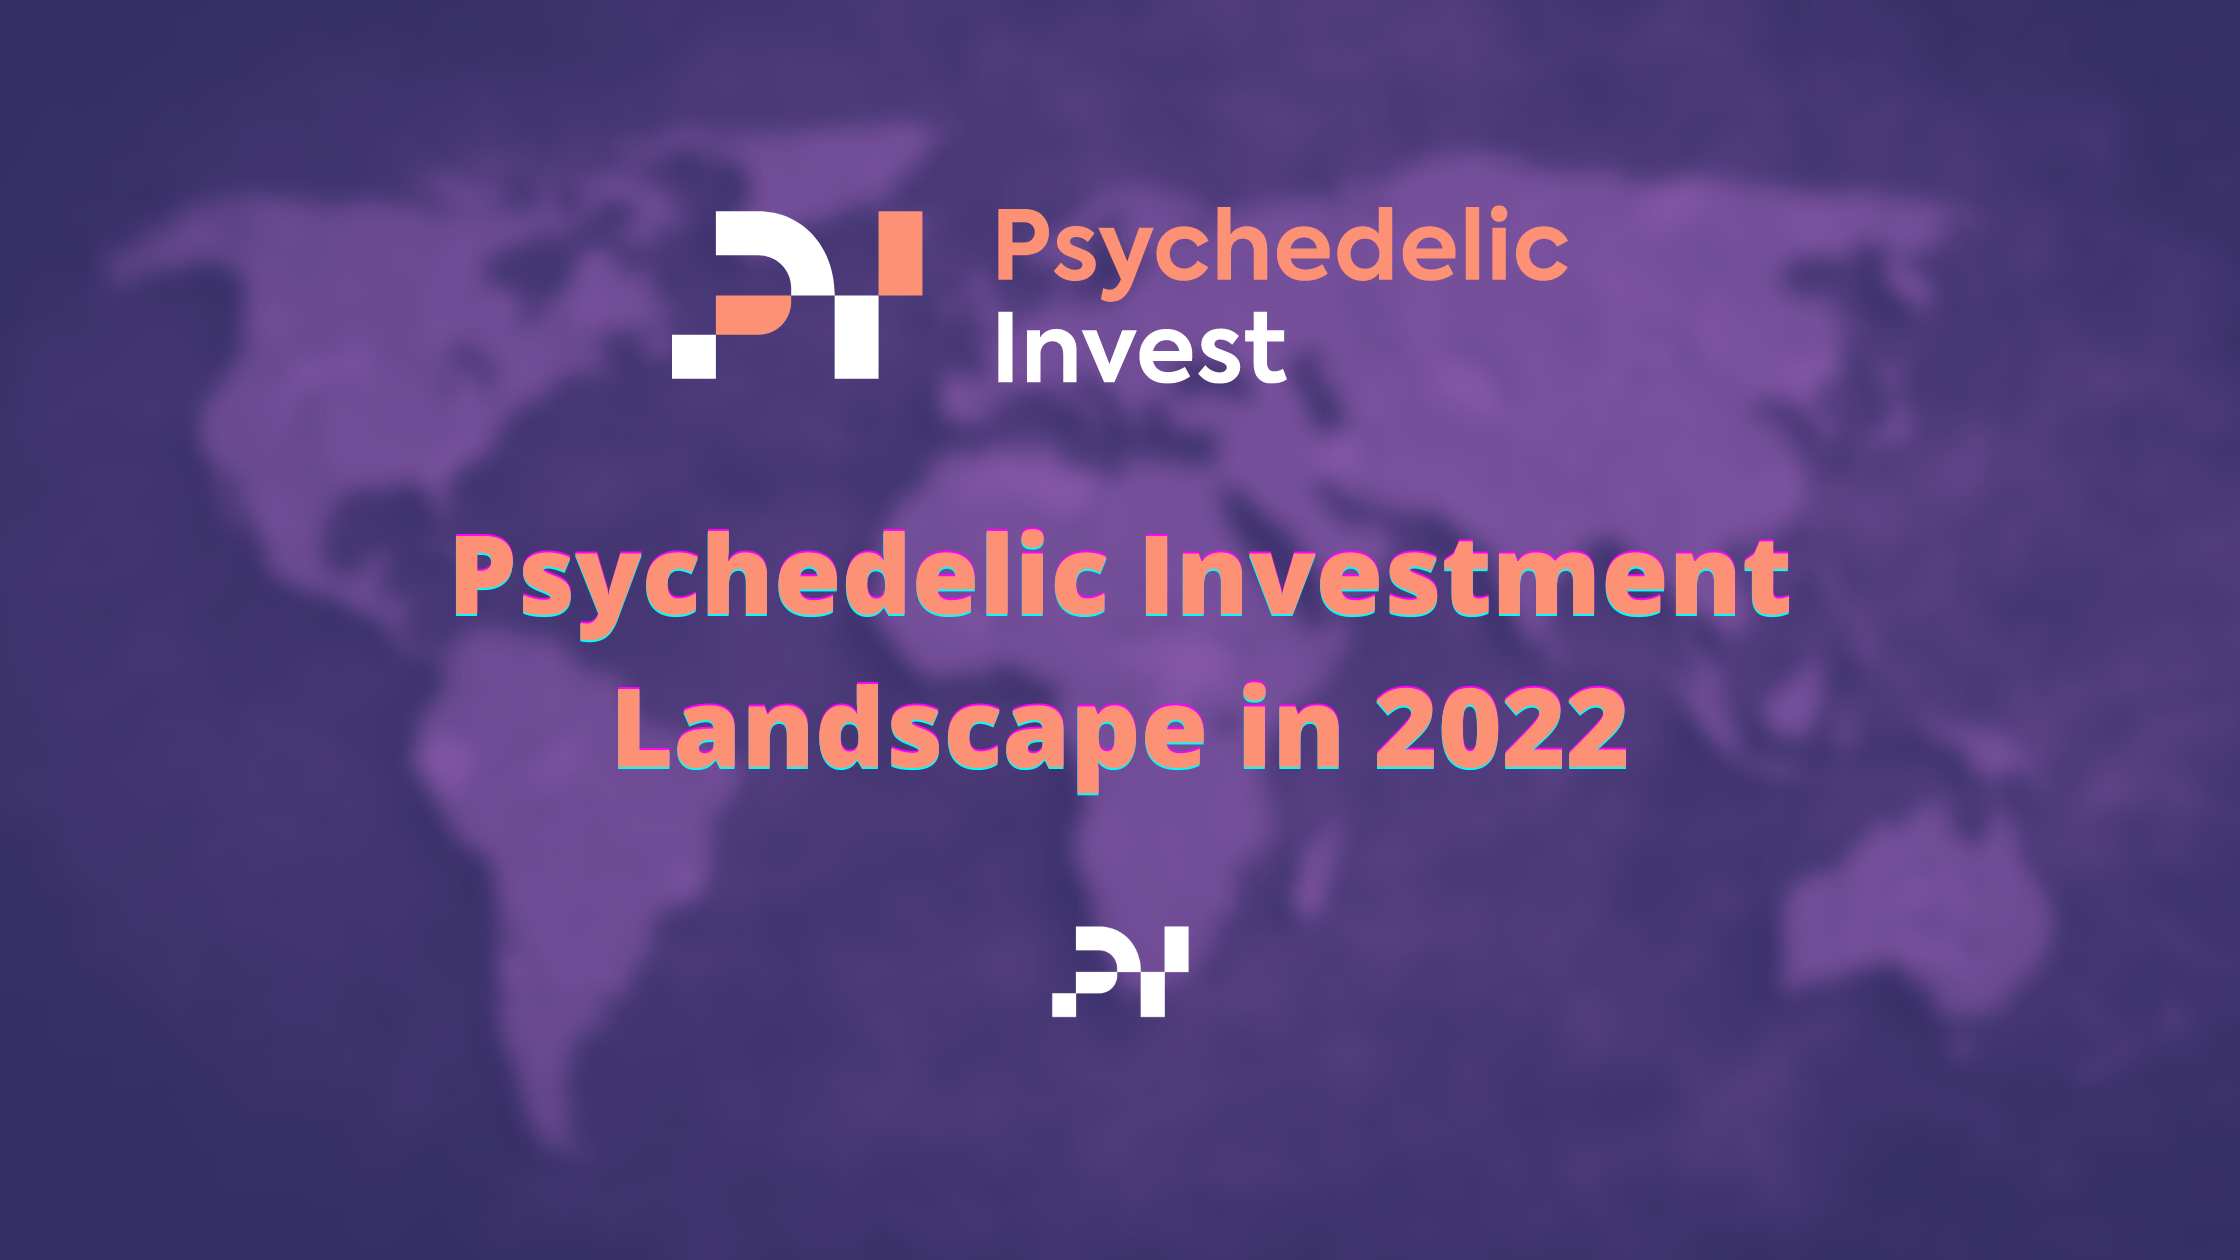 2022: Psychedelic Investment Landscape